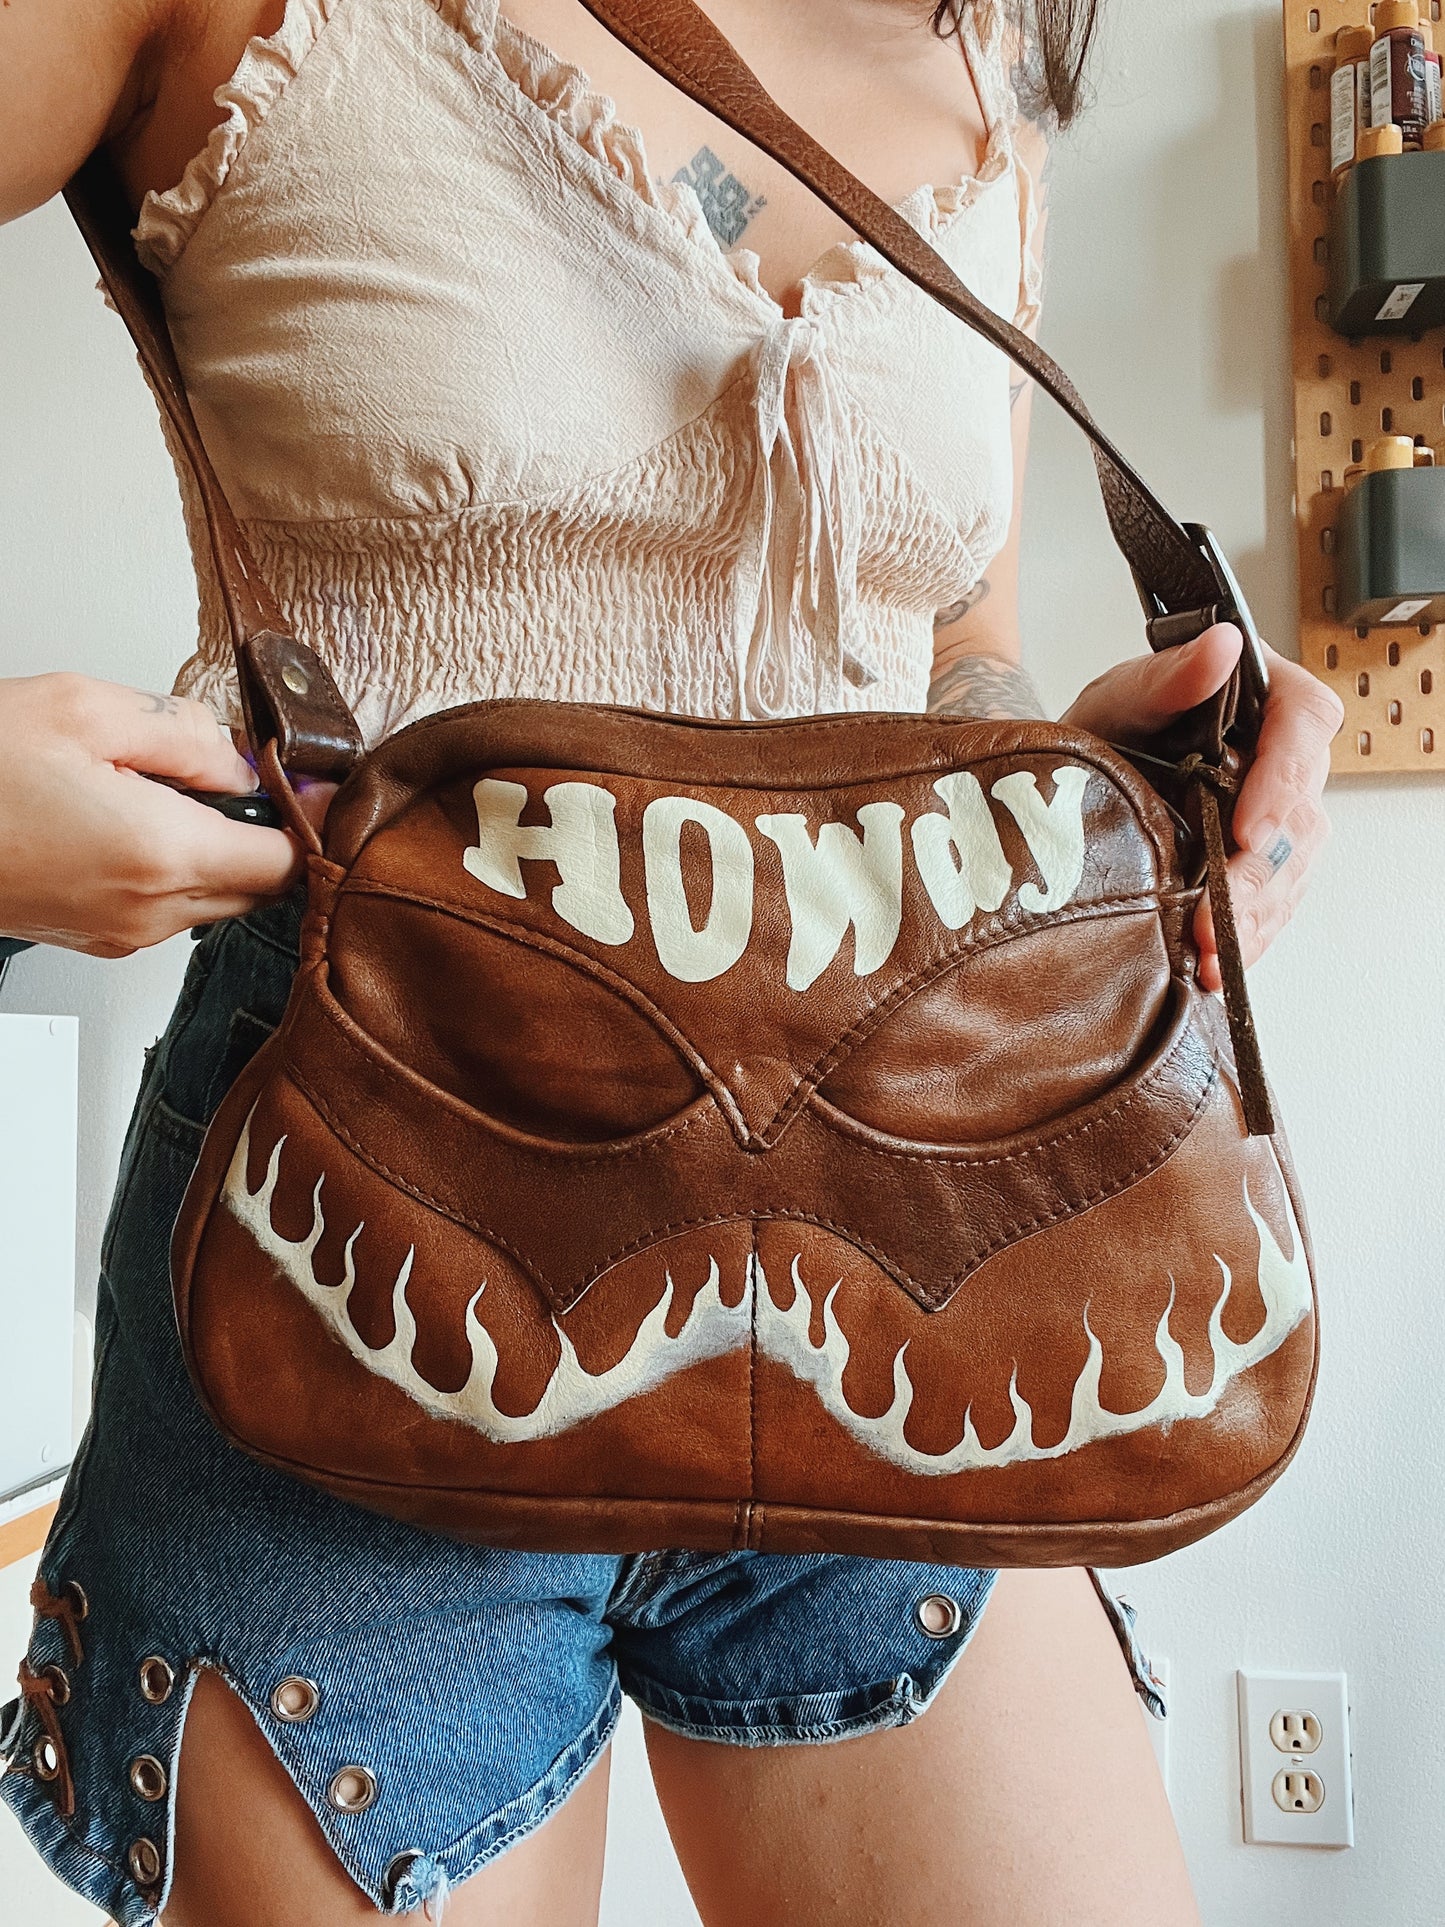 The Howdy Bag